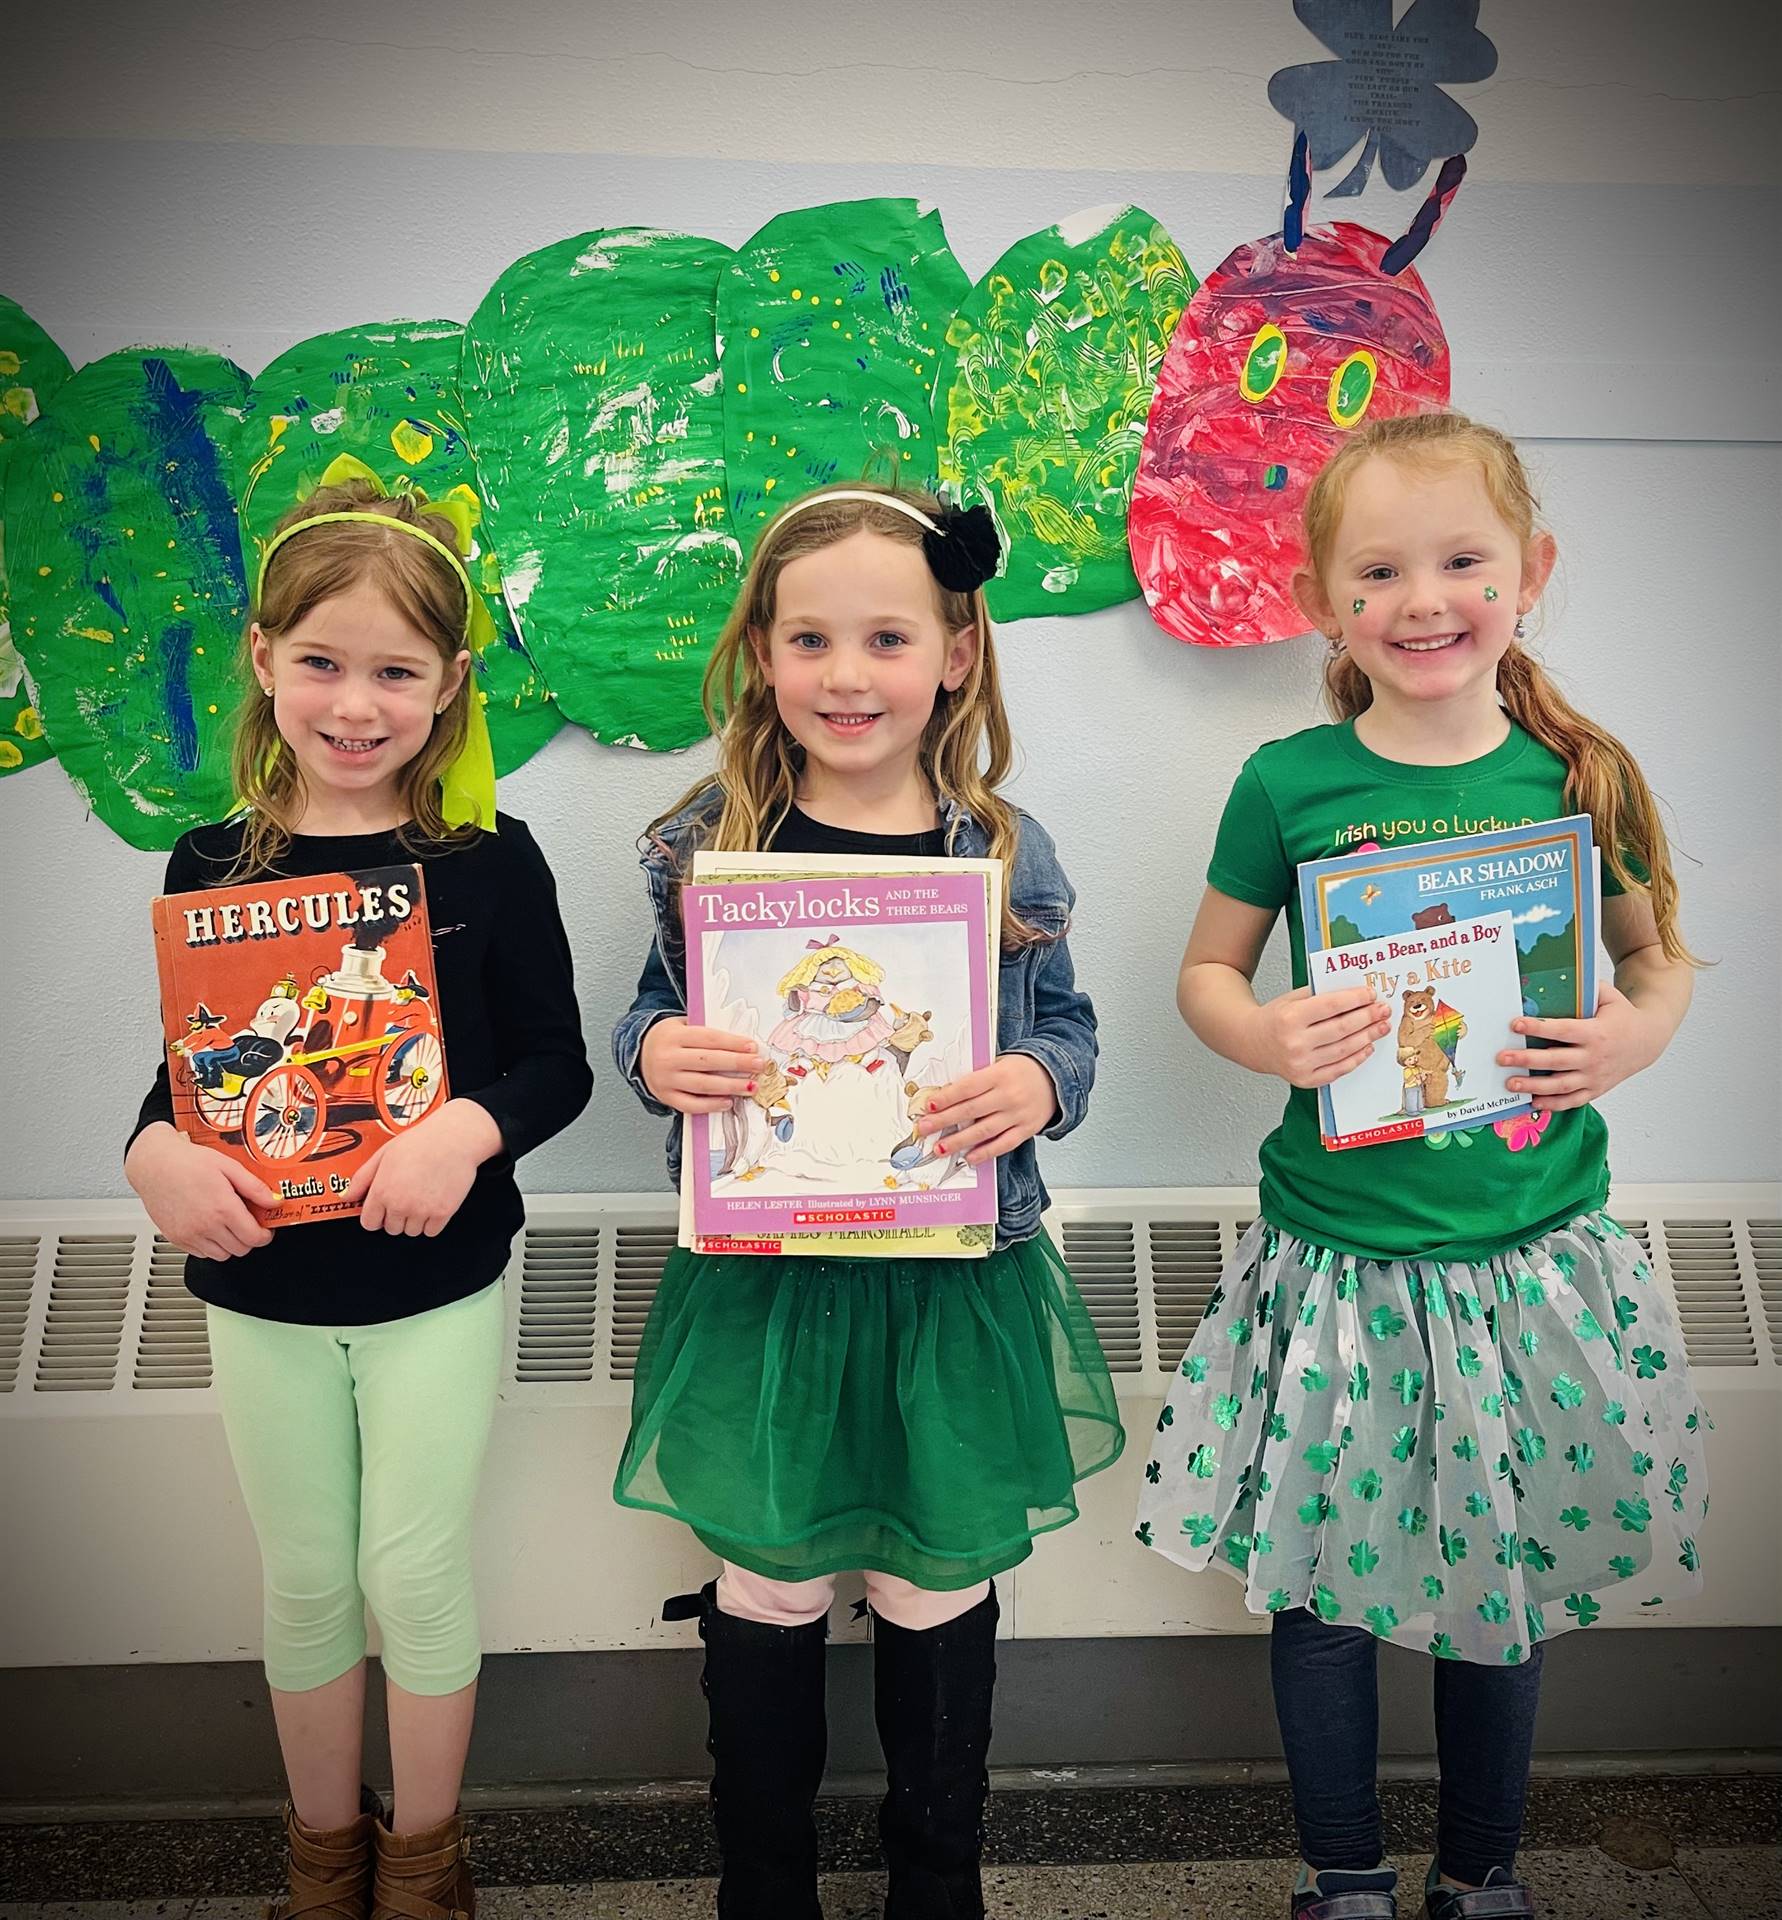 3 students with books and a giant green caterpillar background